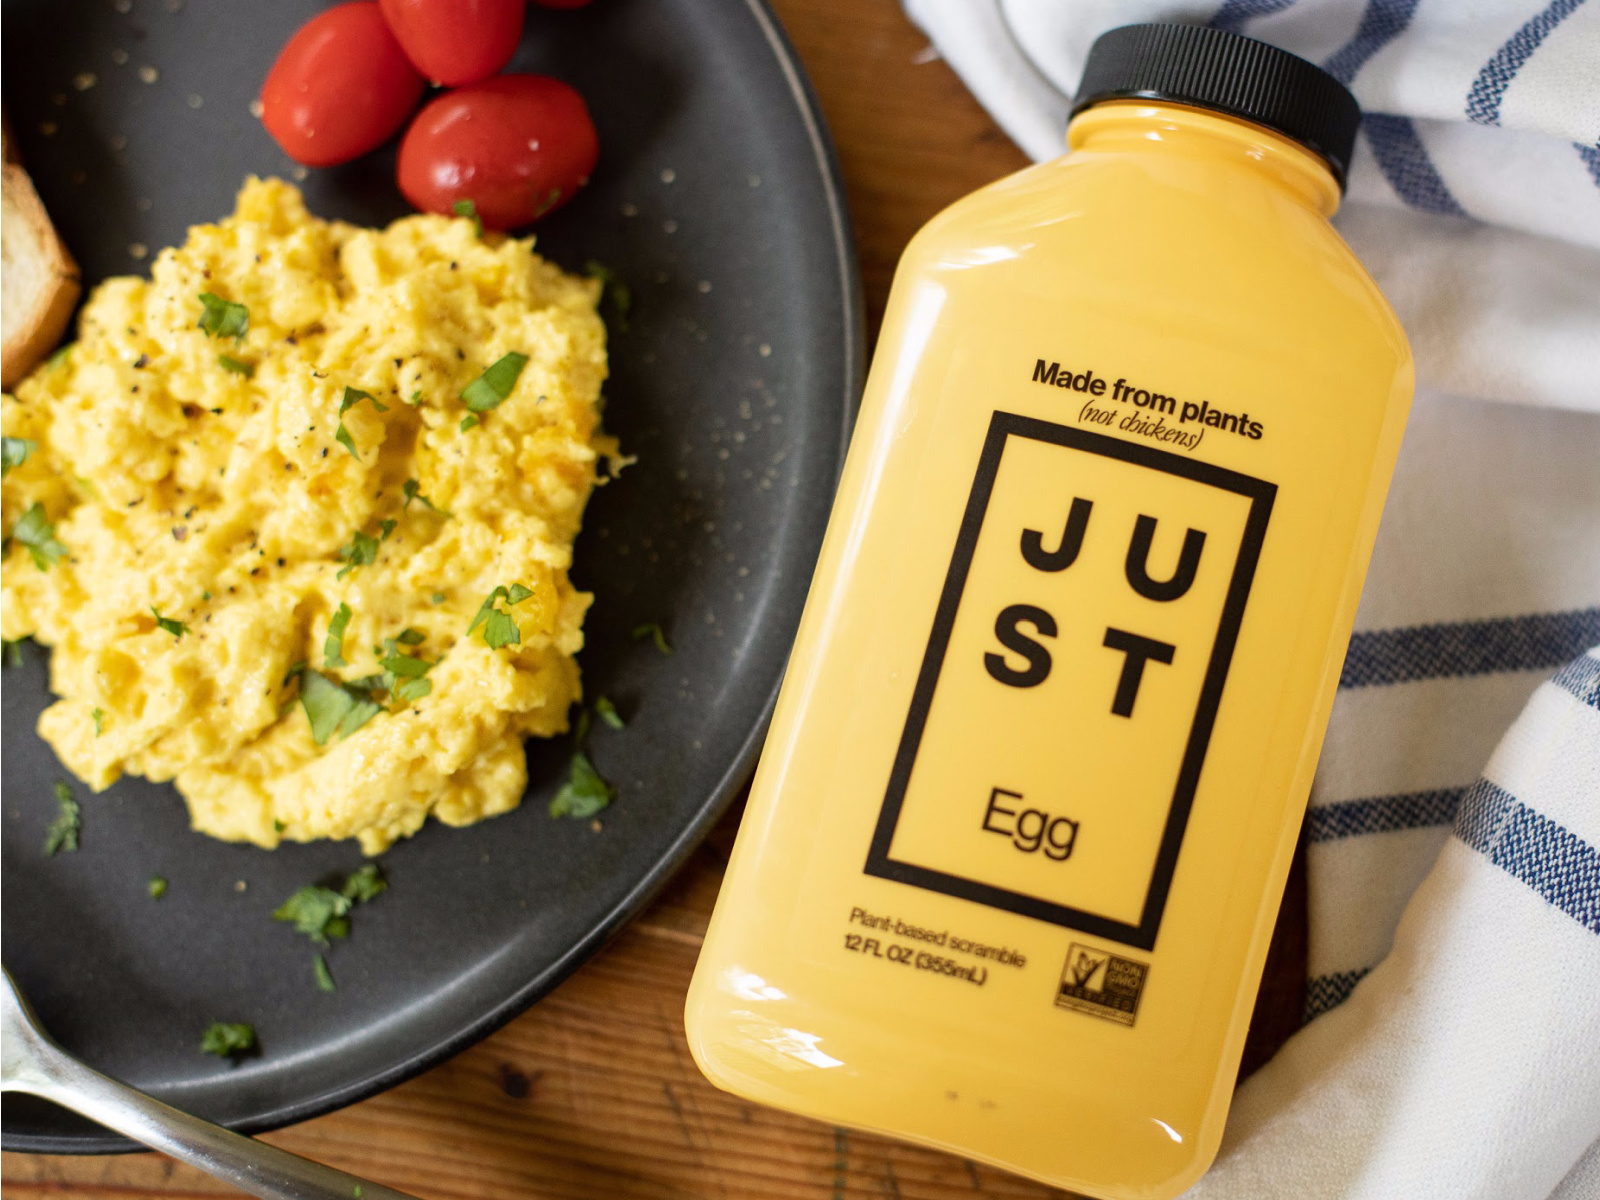 Just Egg Plant-Based Scramble Only $2.24 At Publix (Regular Price $4.79)